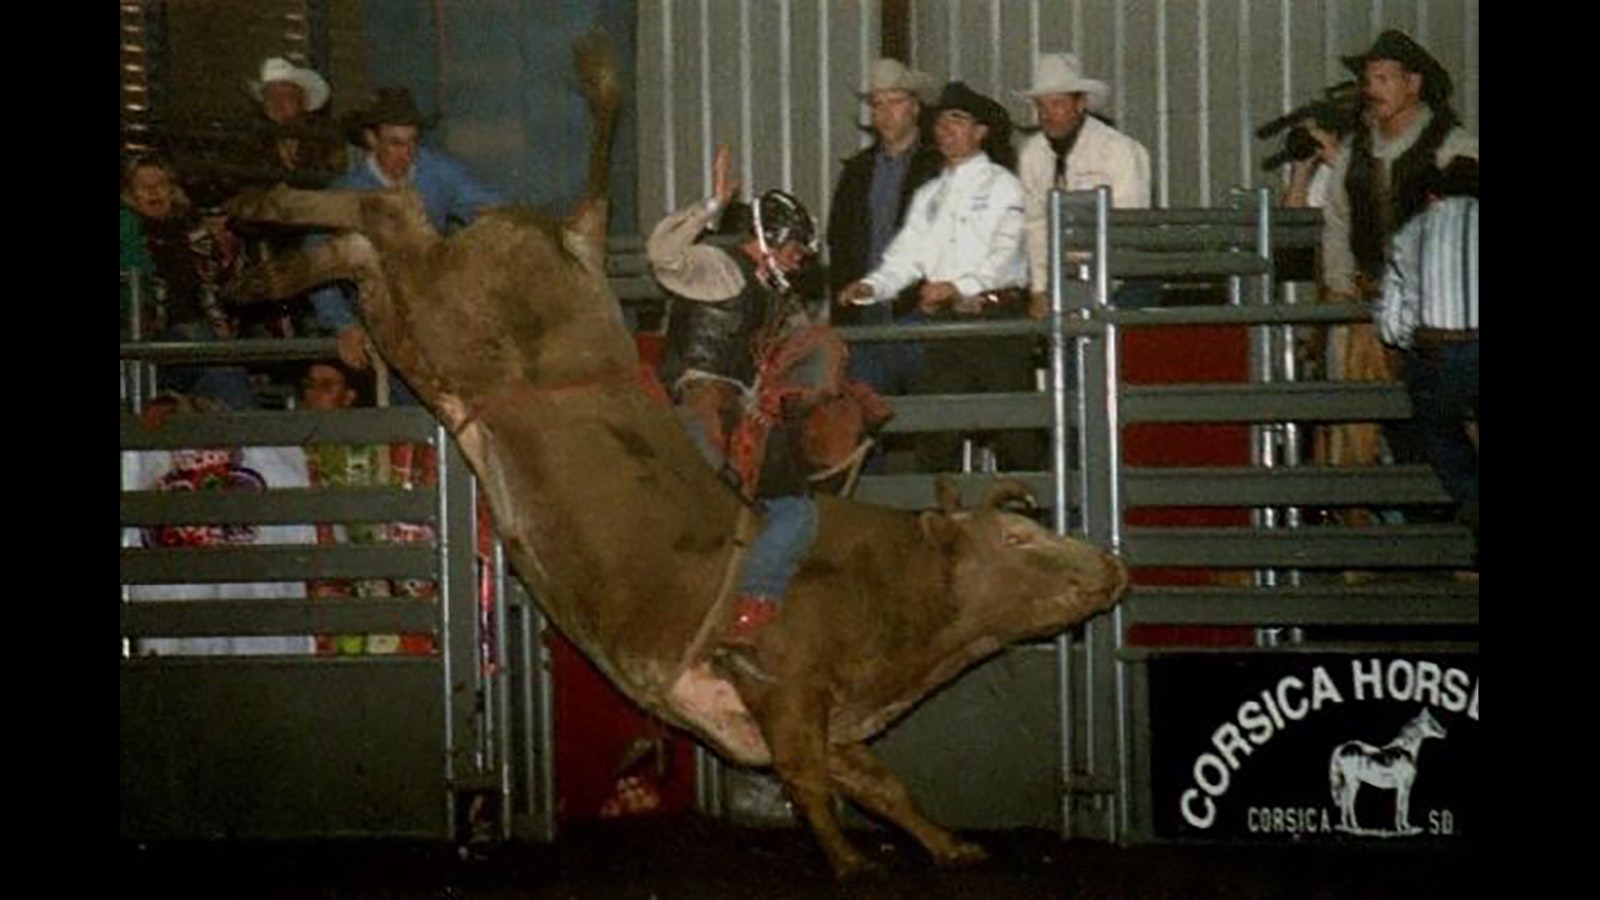 Nick Morrison's family has deep roots in rodeo. He was a bull rider.